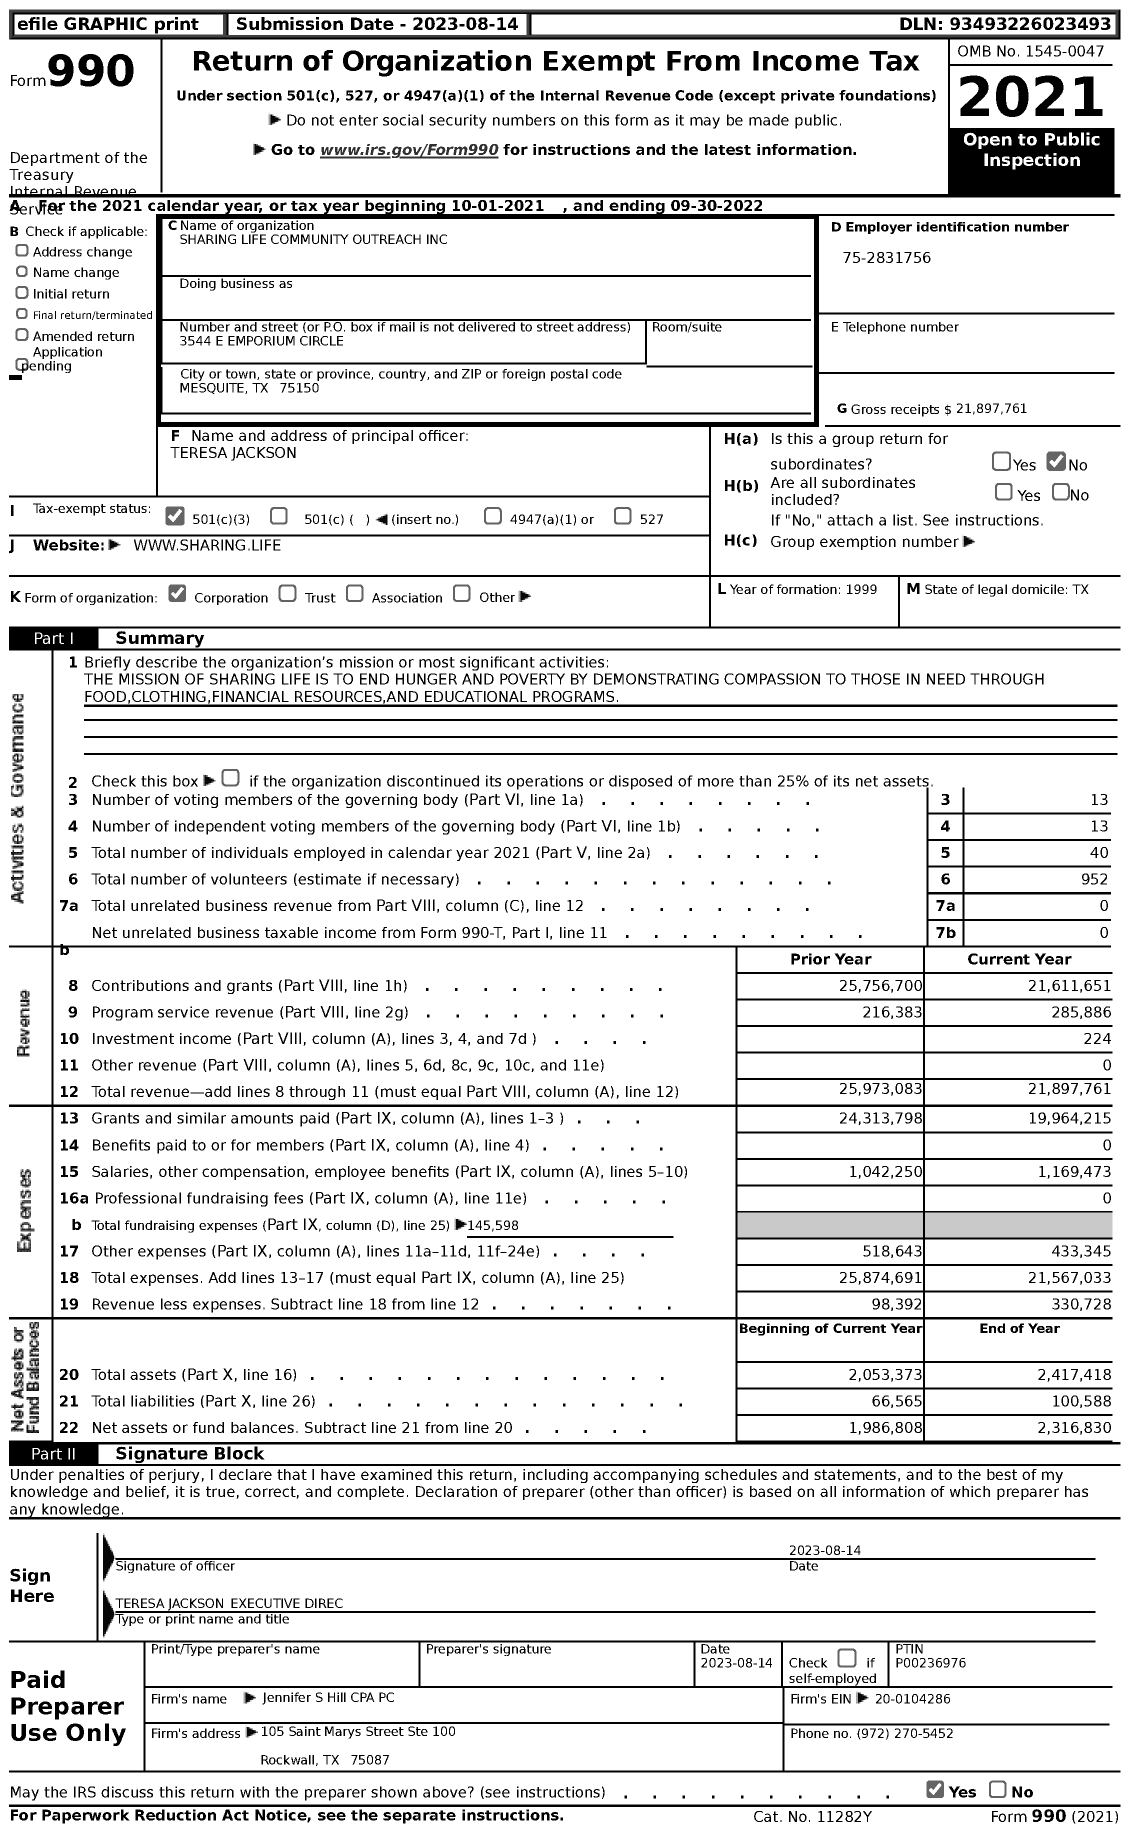 Image of first page of 2021 Form 990 for Sharing Life Community Outreach